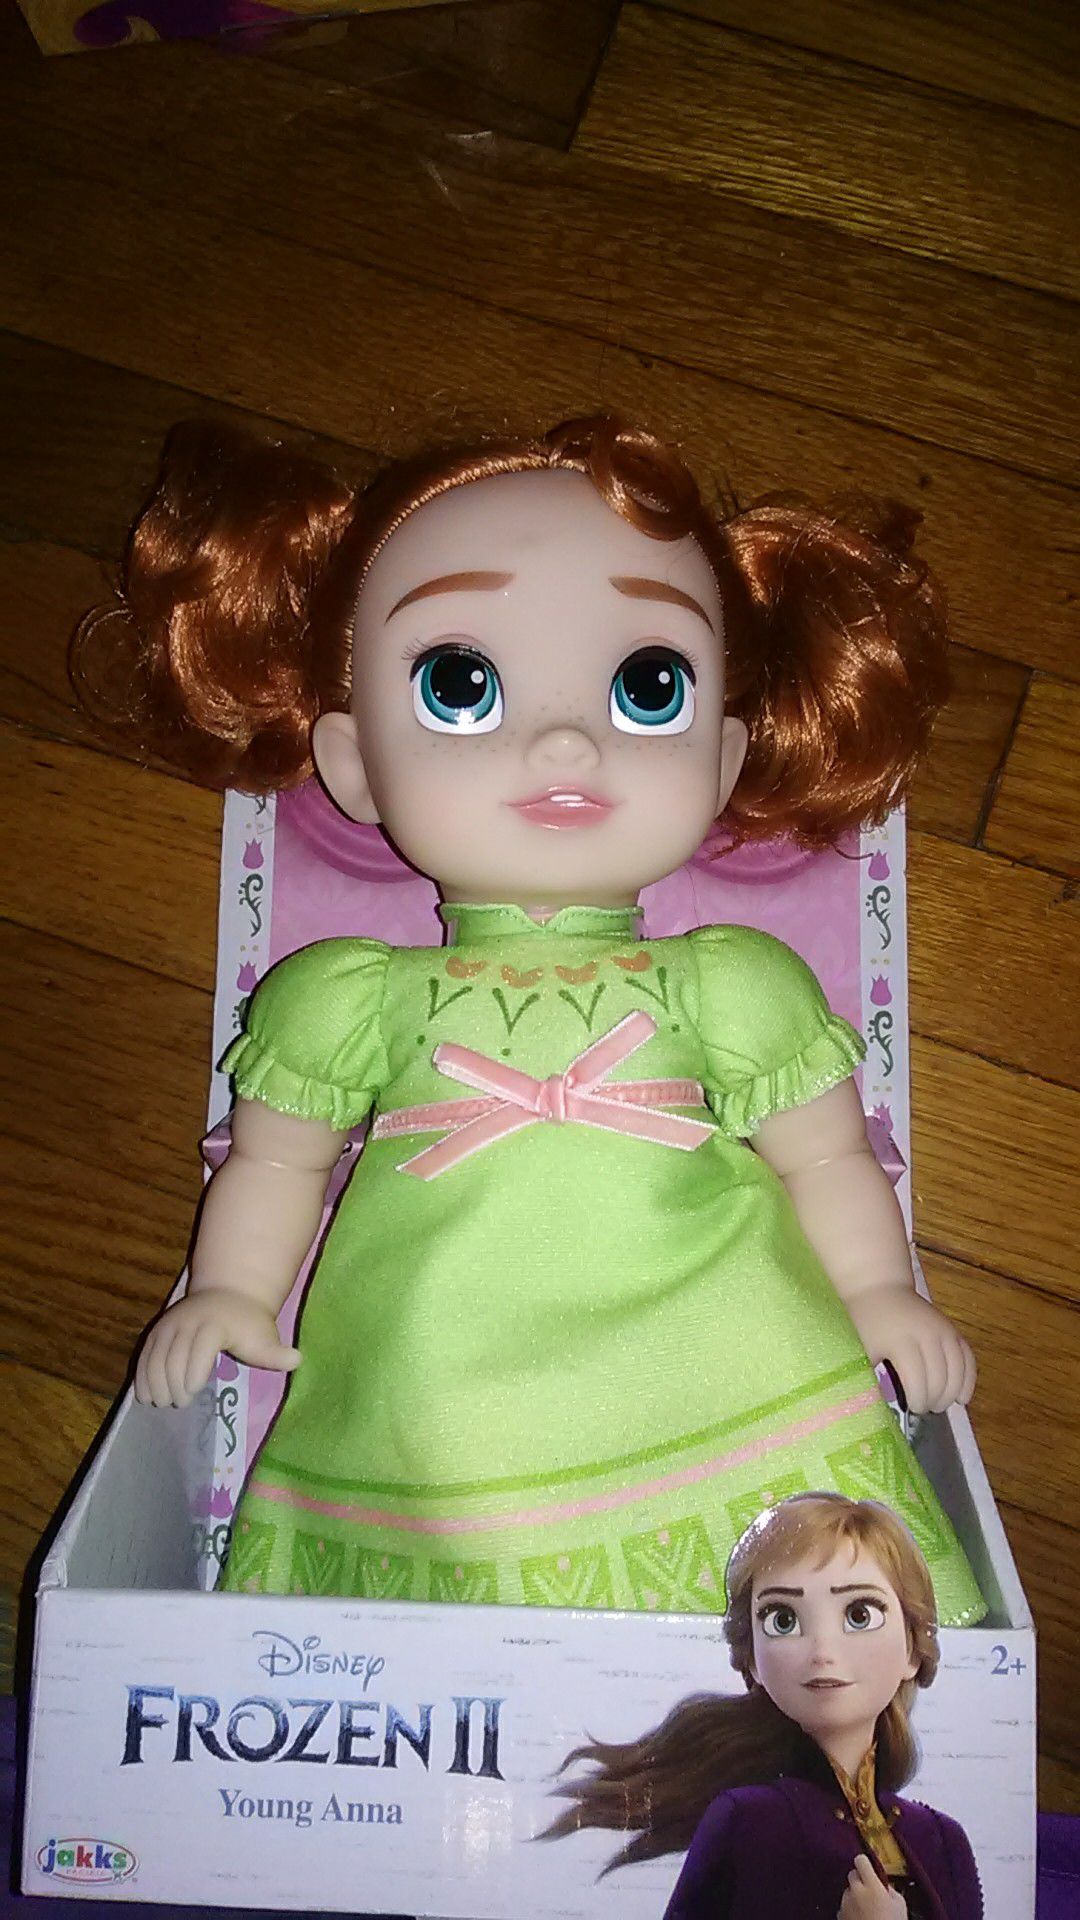 Frozen doll,doll,toy, girl toy